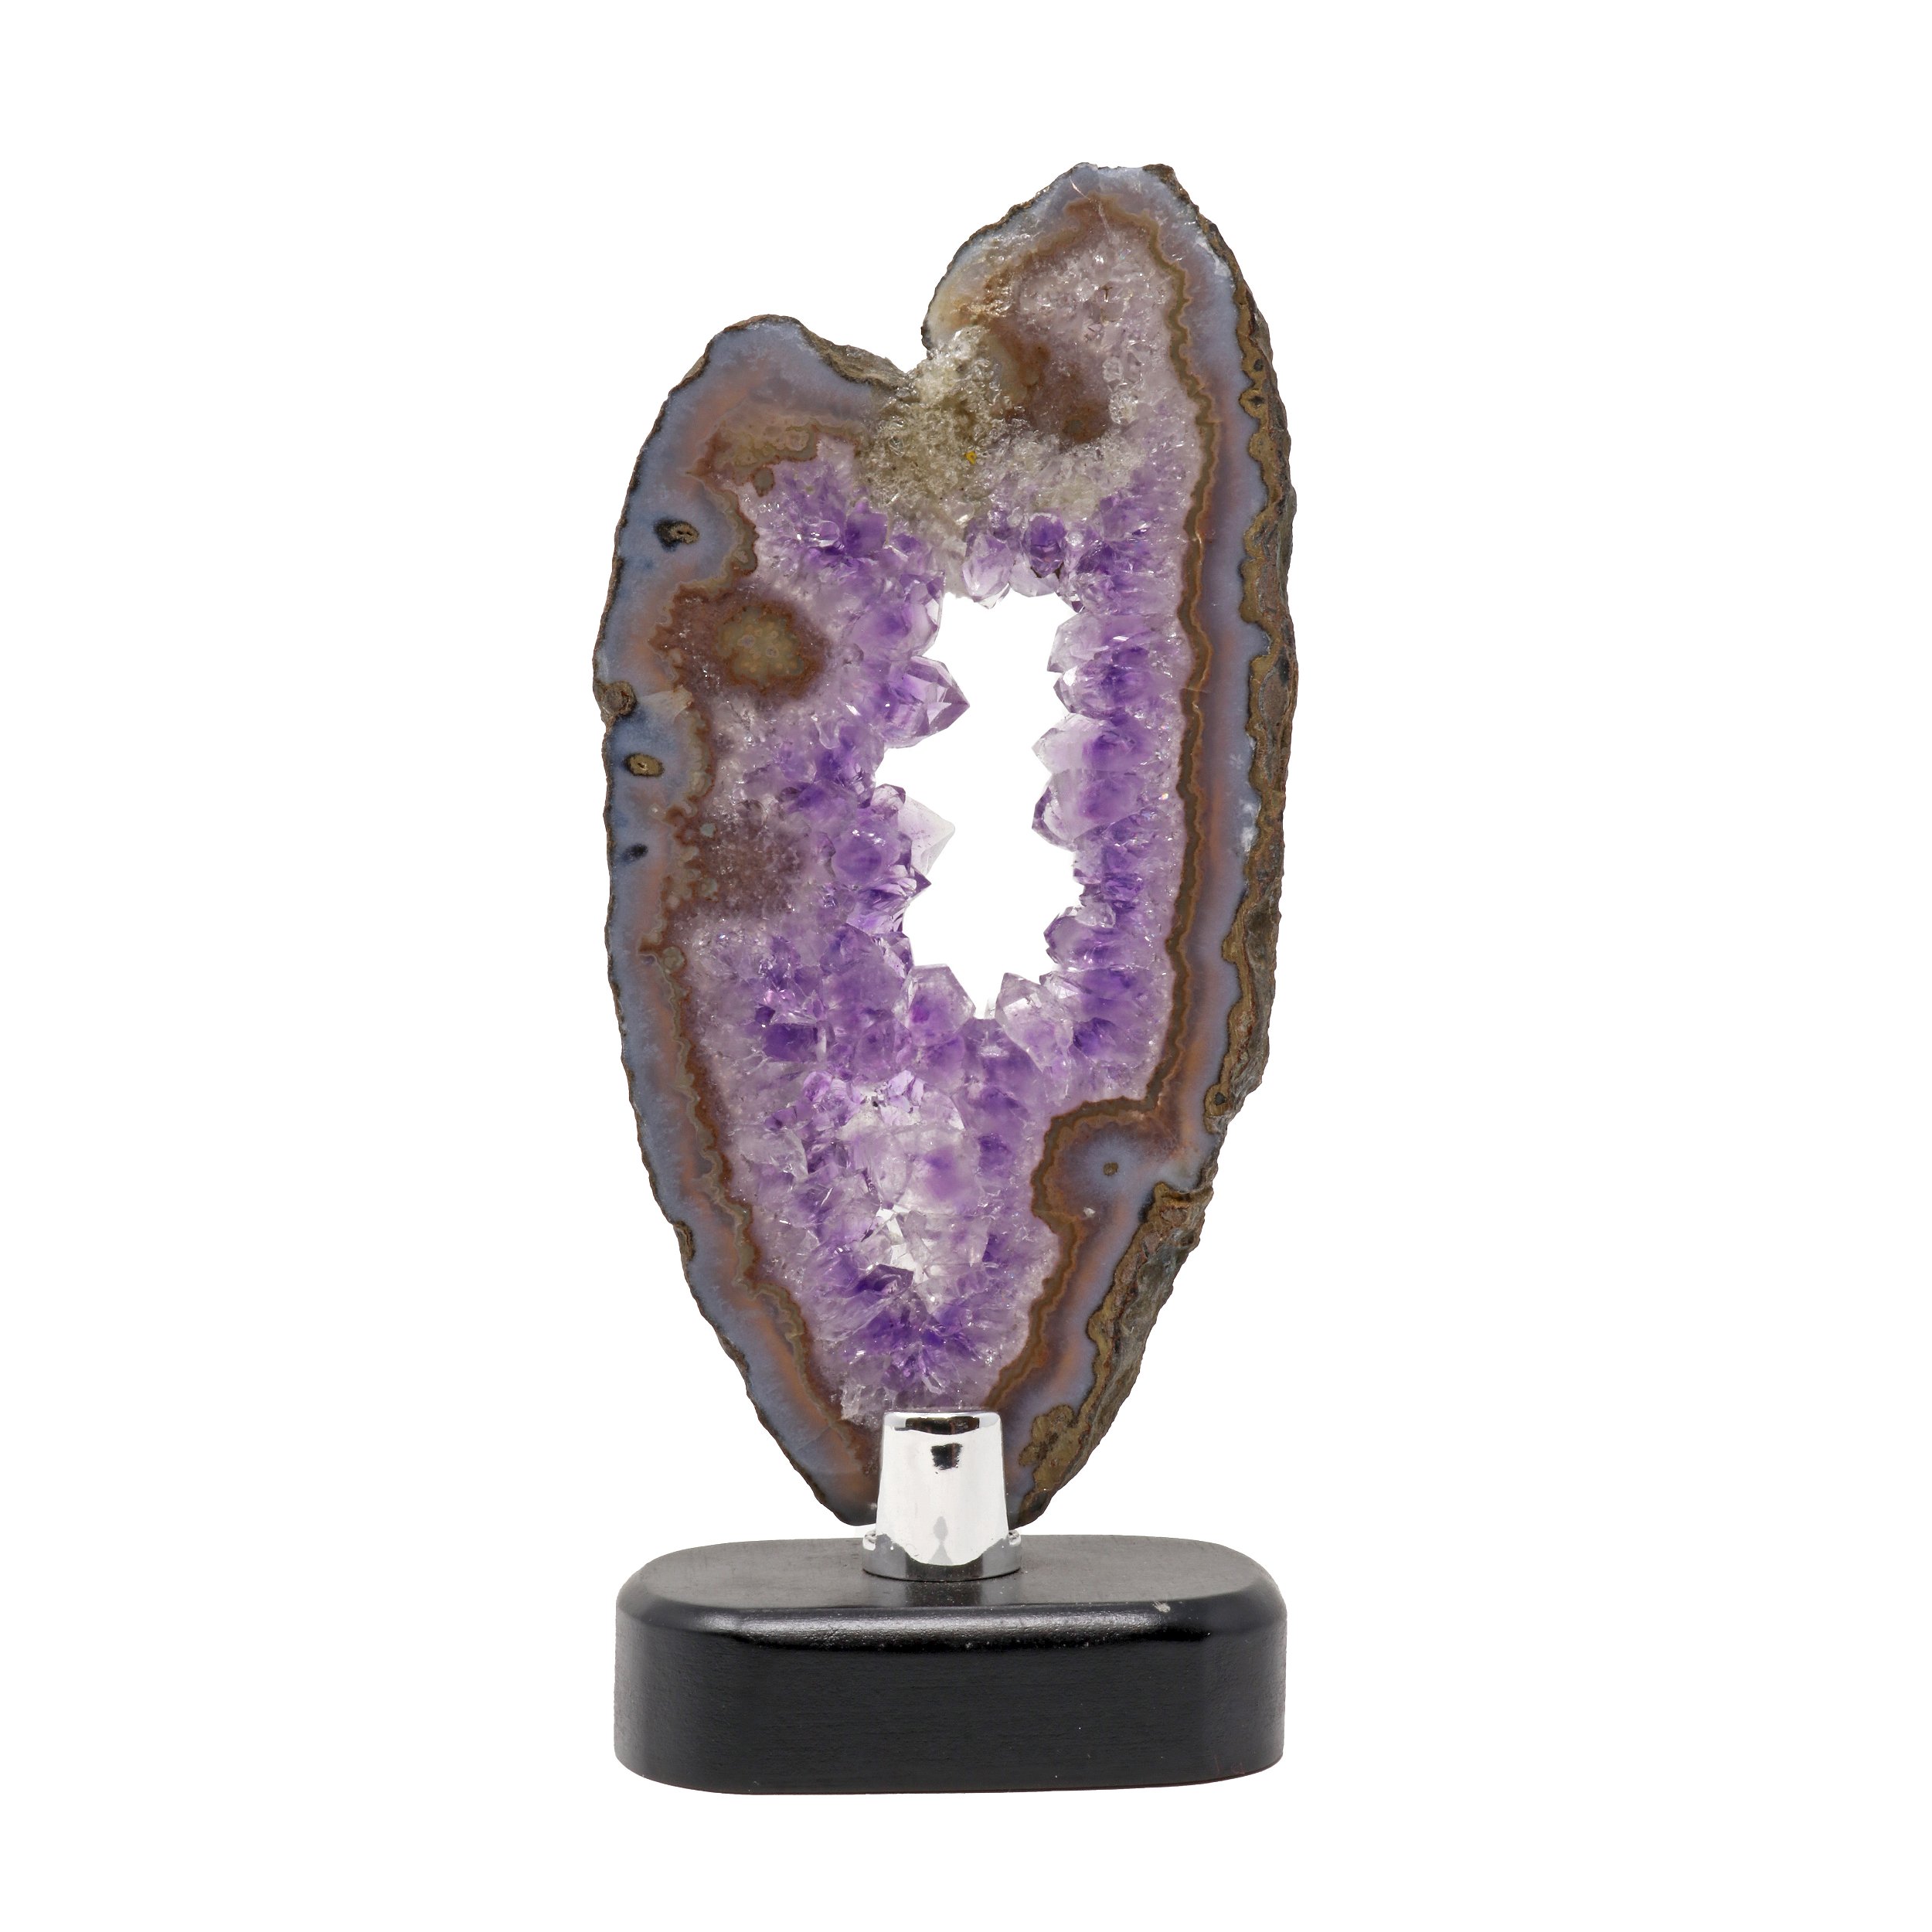 Agate Slice -Amethyst Quartz With Void Center Brown Accents & Gray Exterior